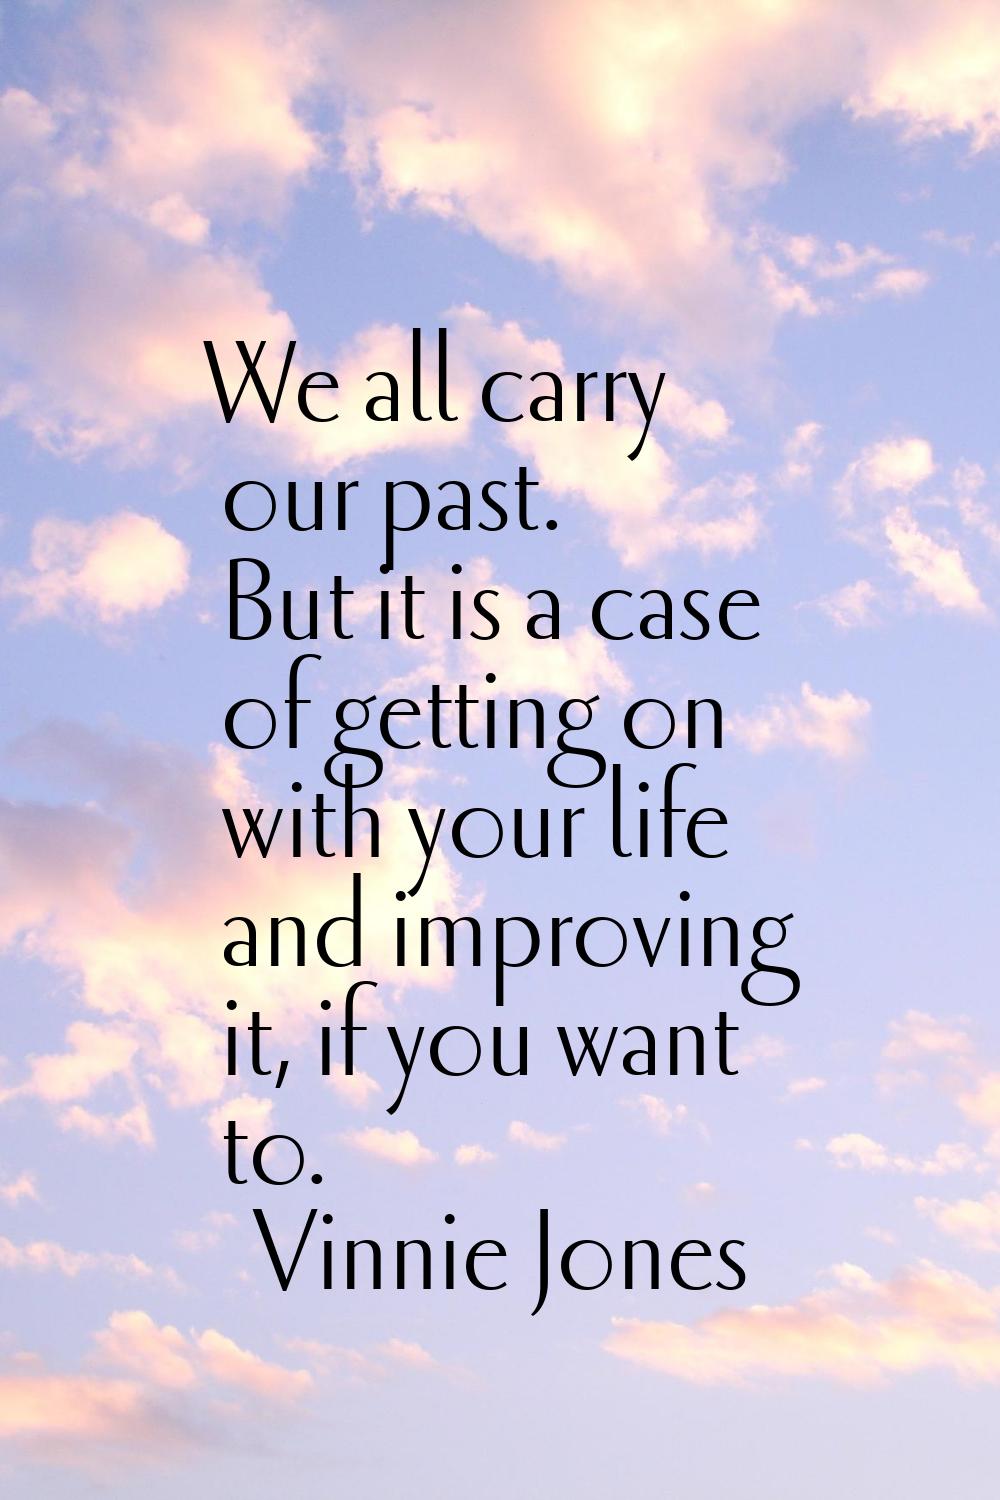 We all carry our past. But it is a case of getting on with your life and improving it, if you want 